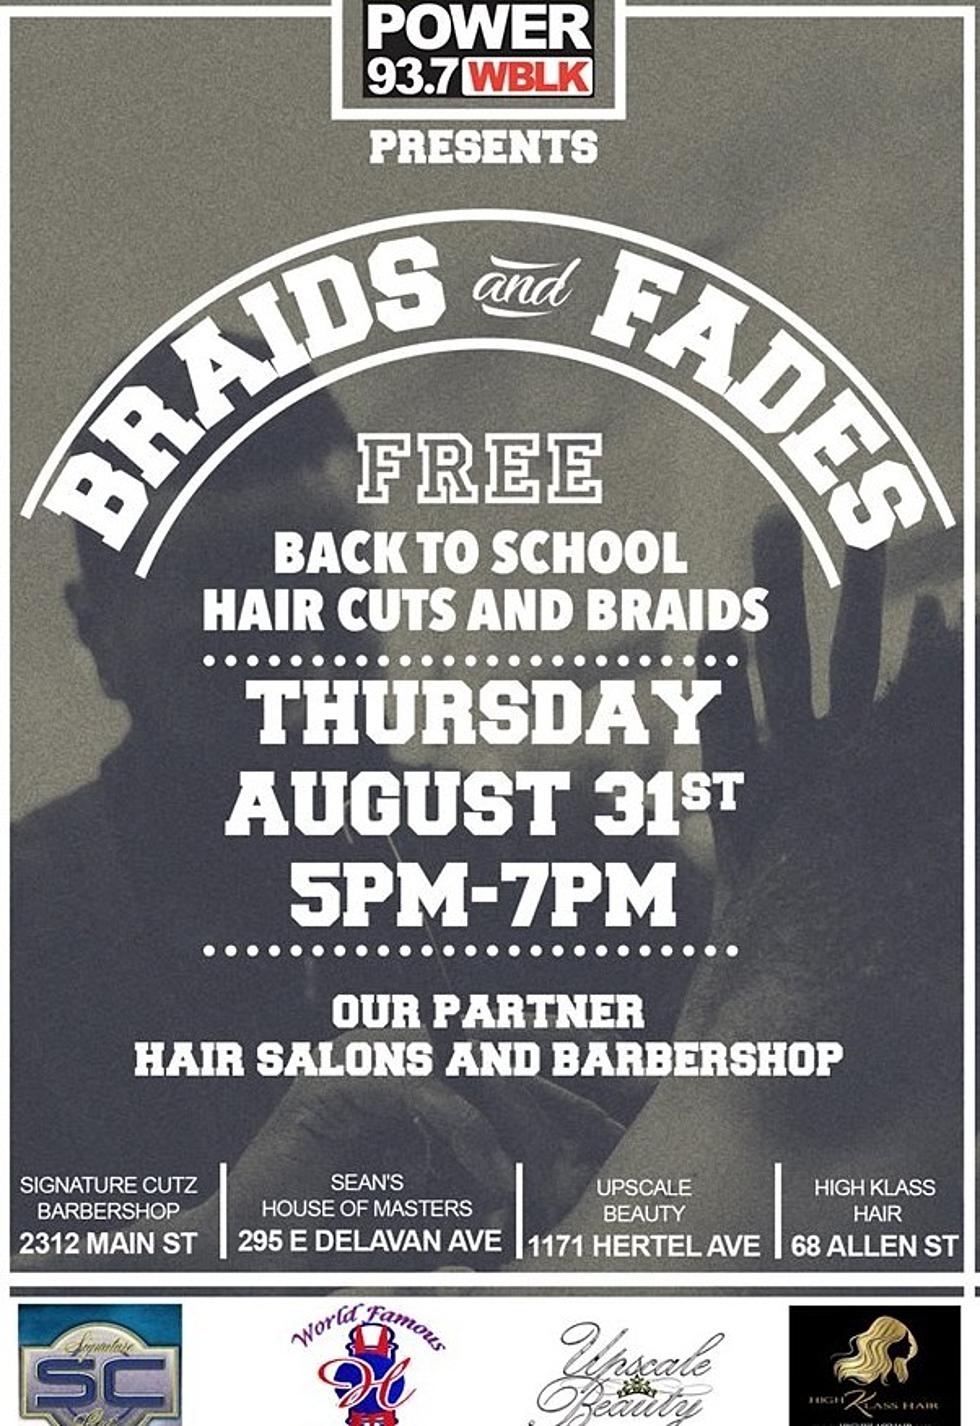 WBLK Presents Braids And Fades Back To School Free Haircuts And Braids